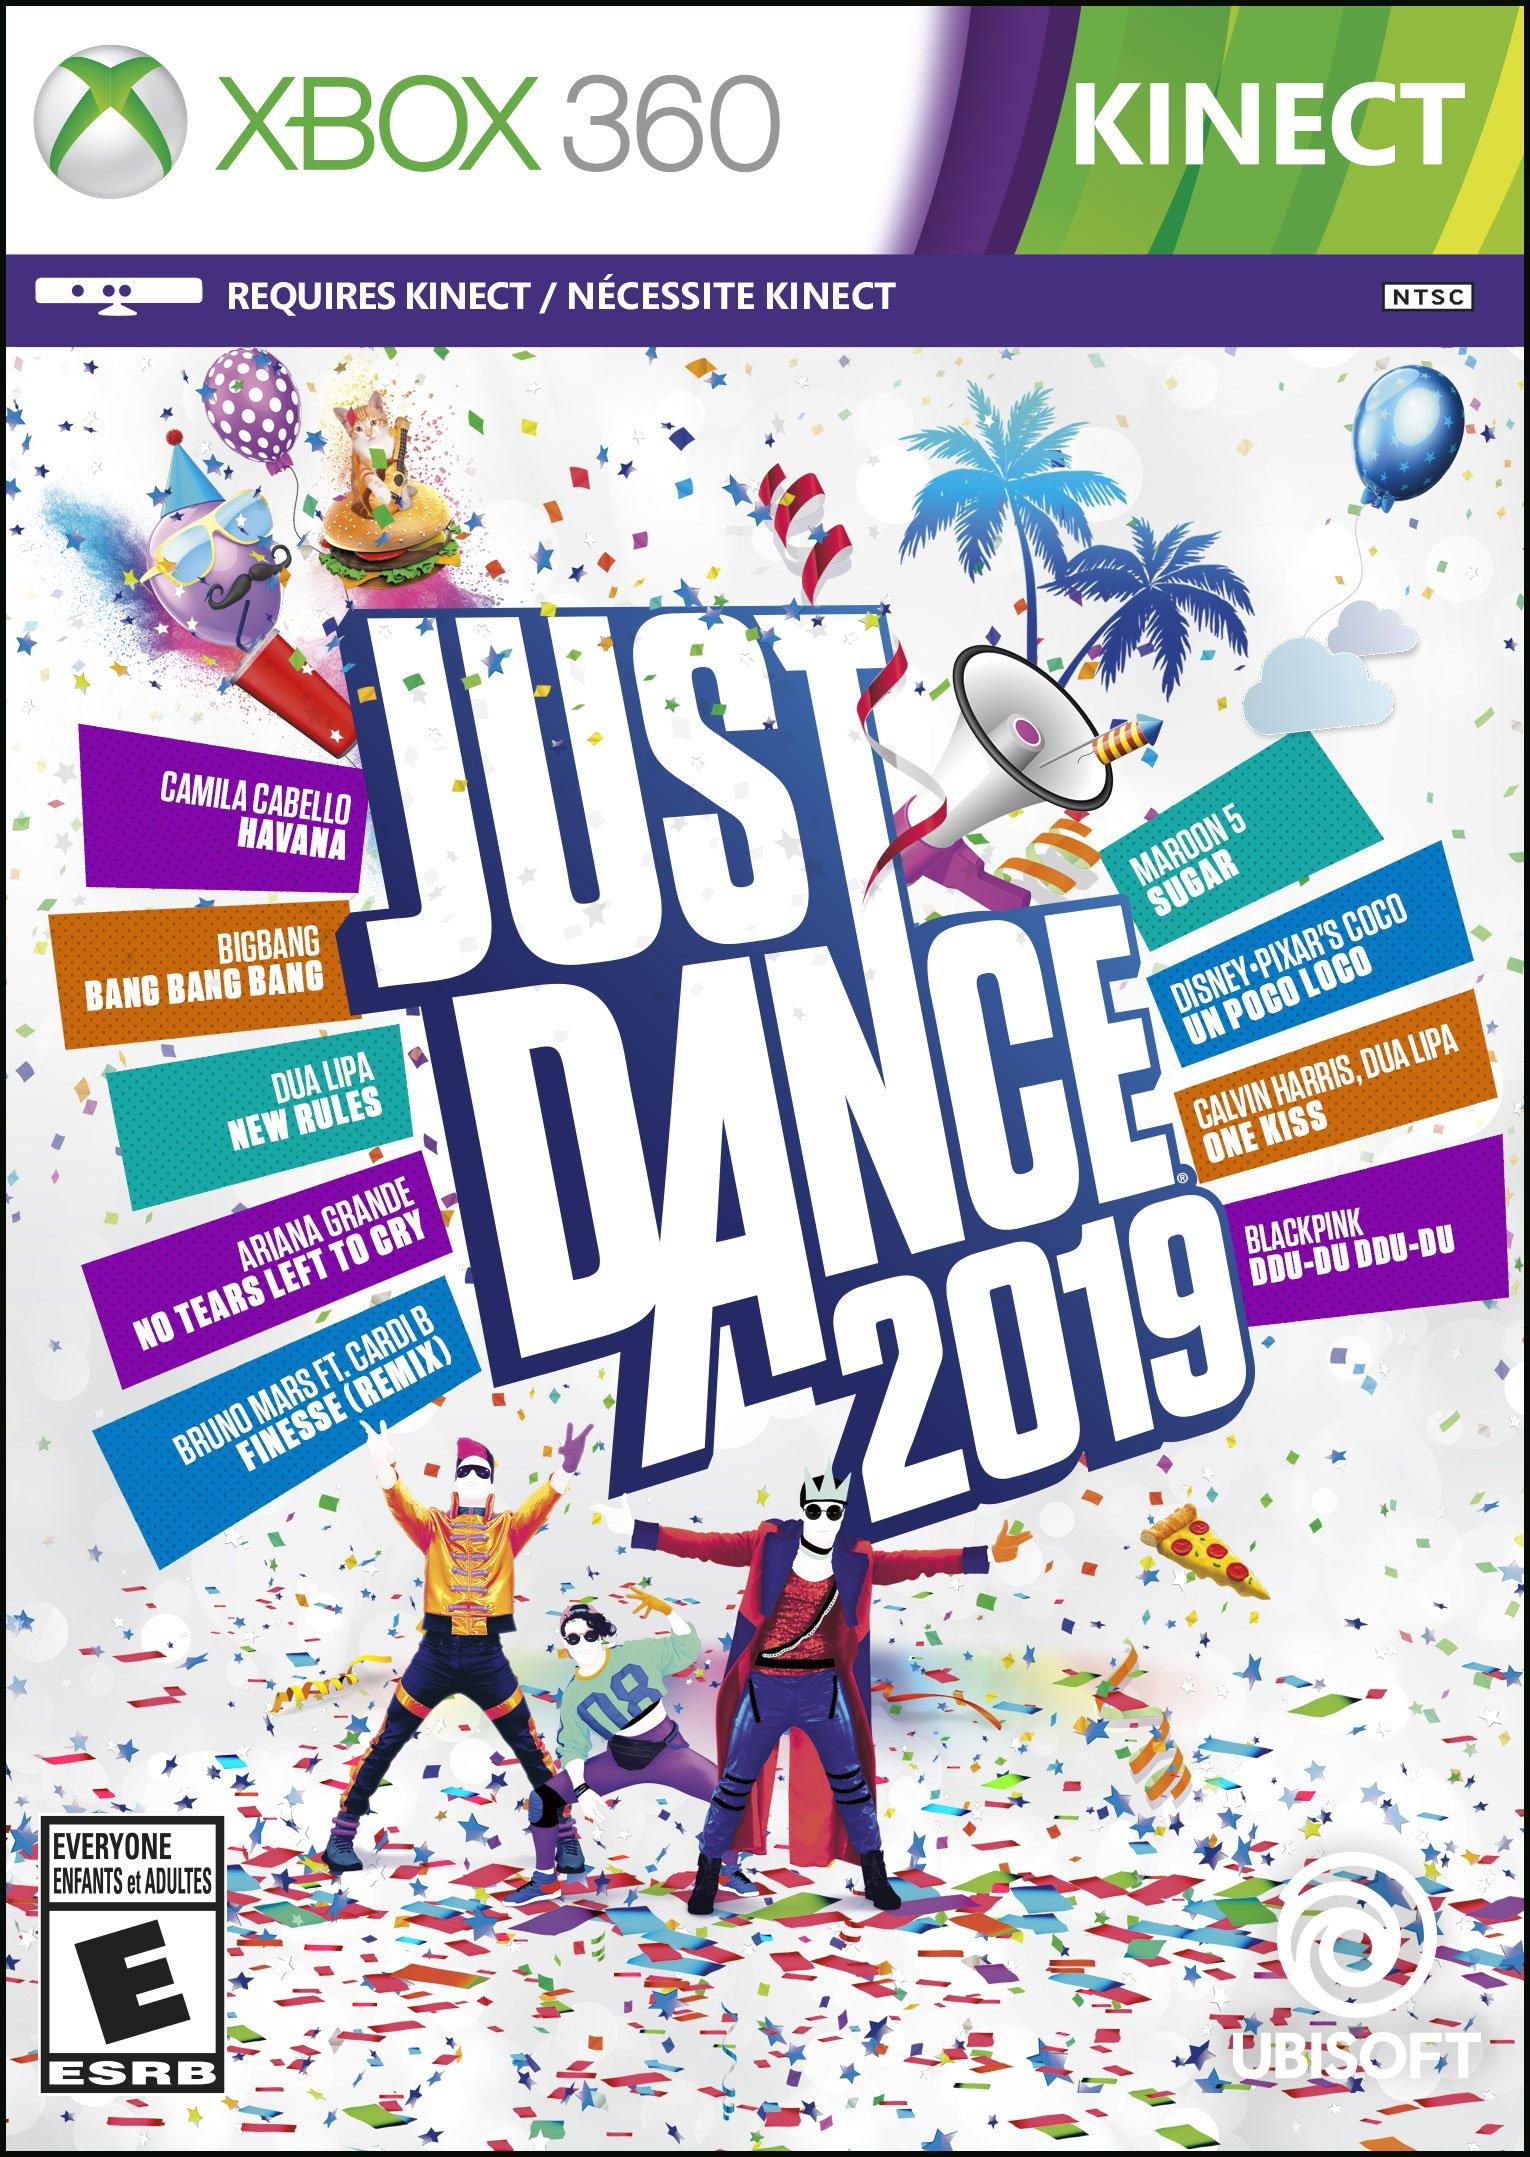 just dance xbox one digital download